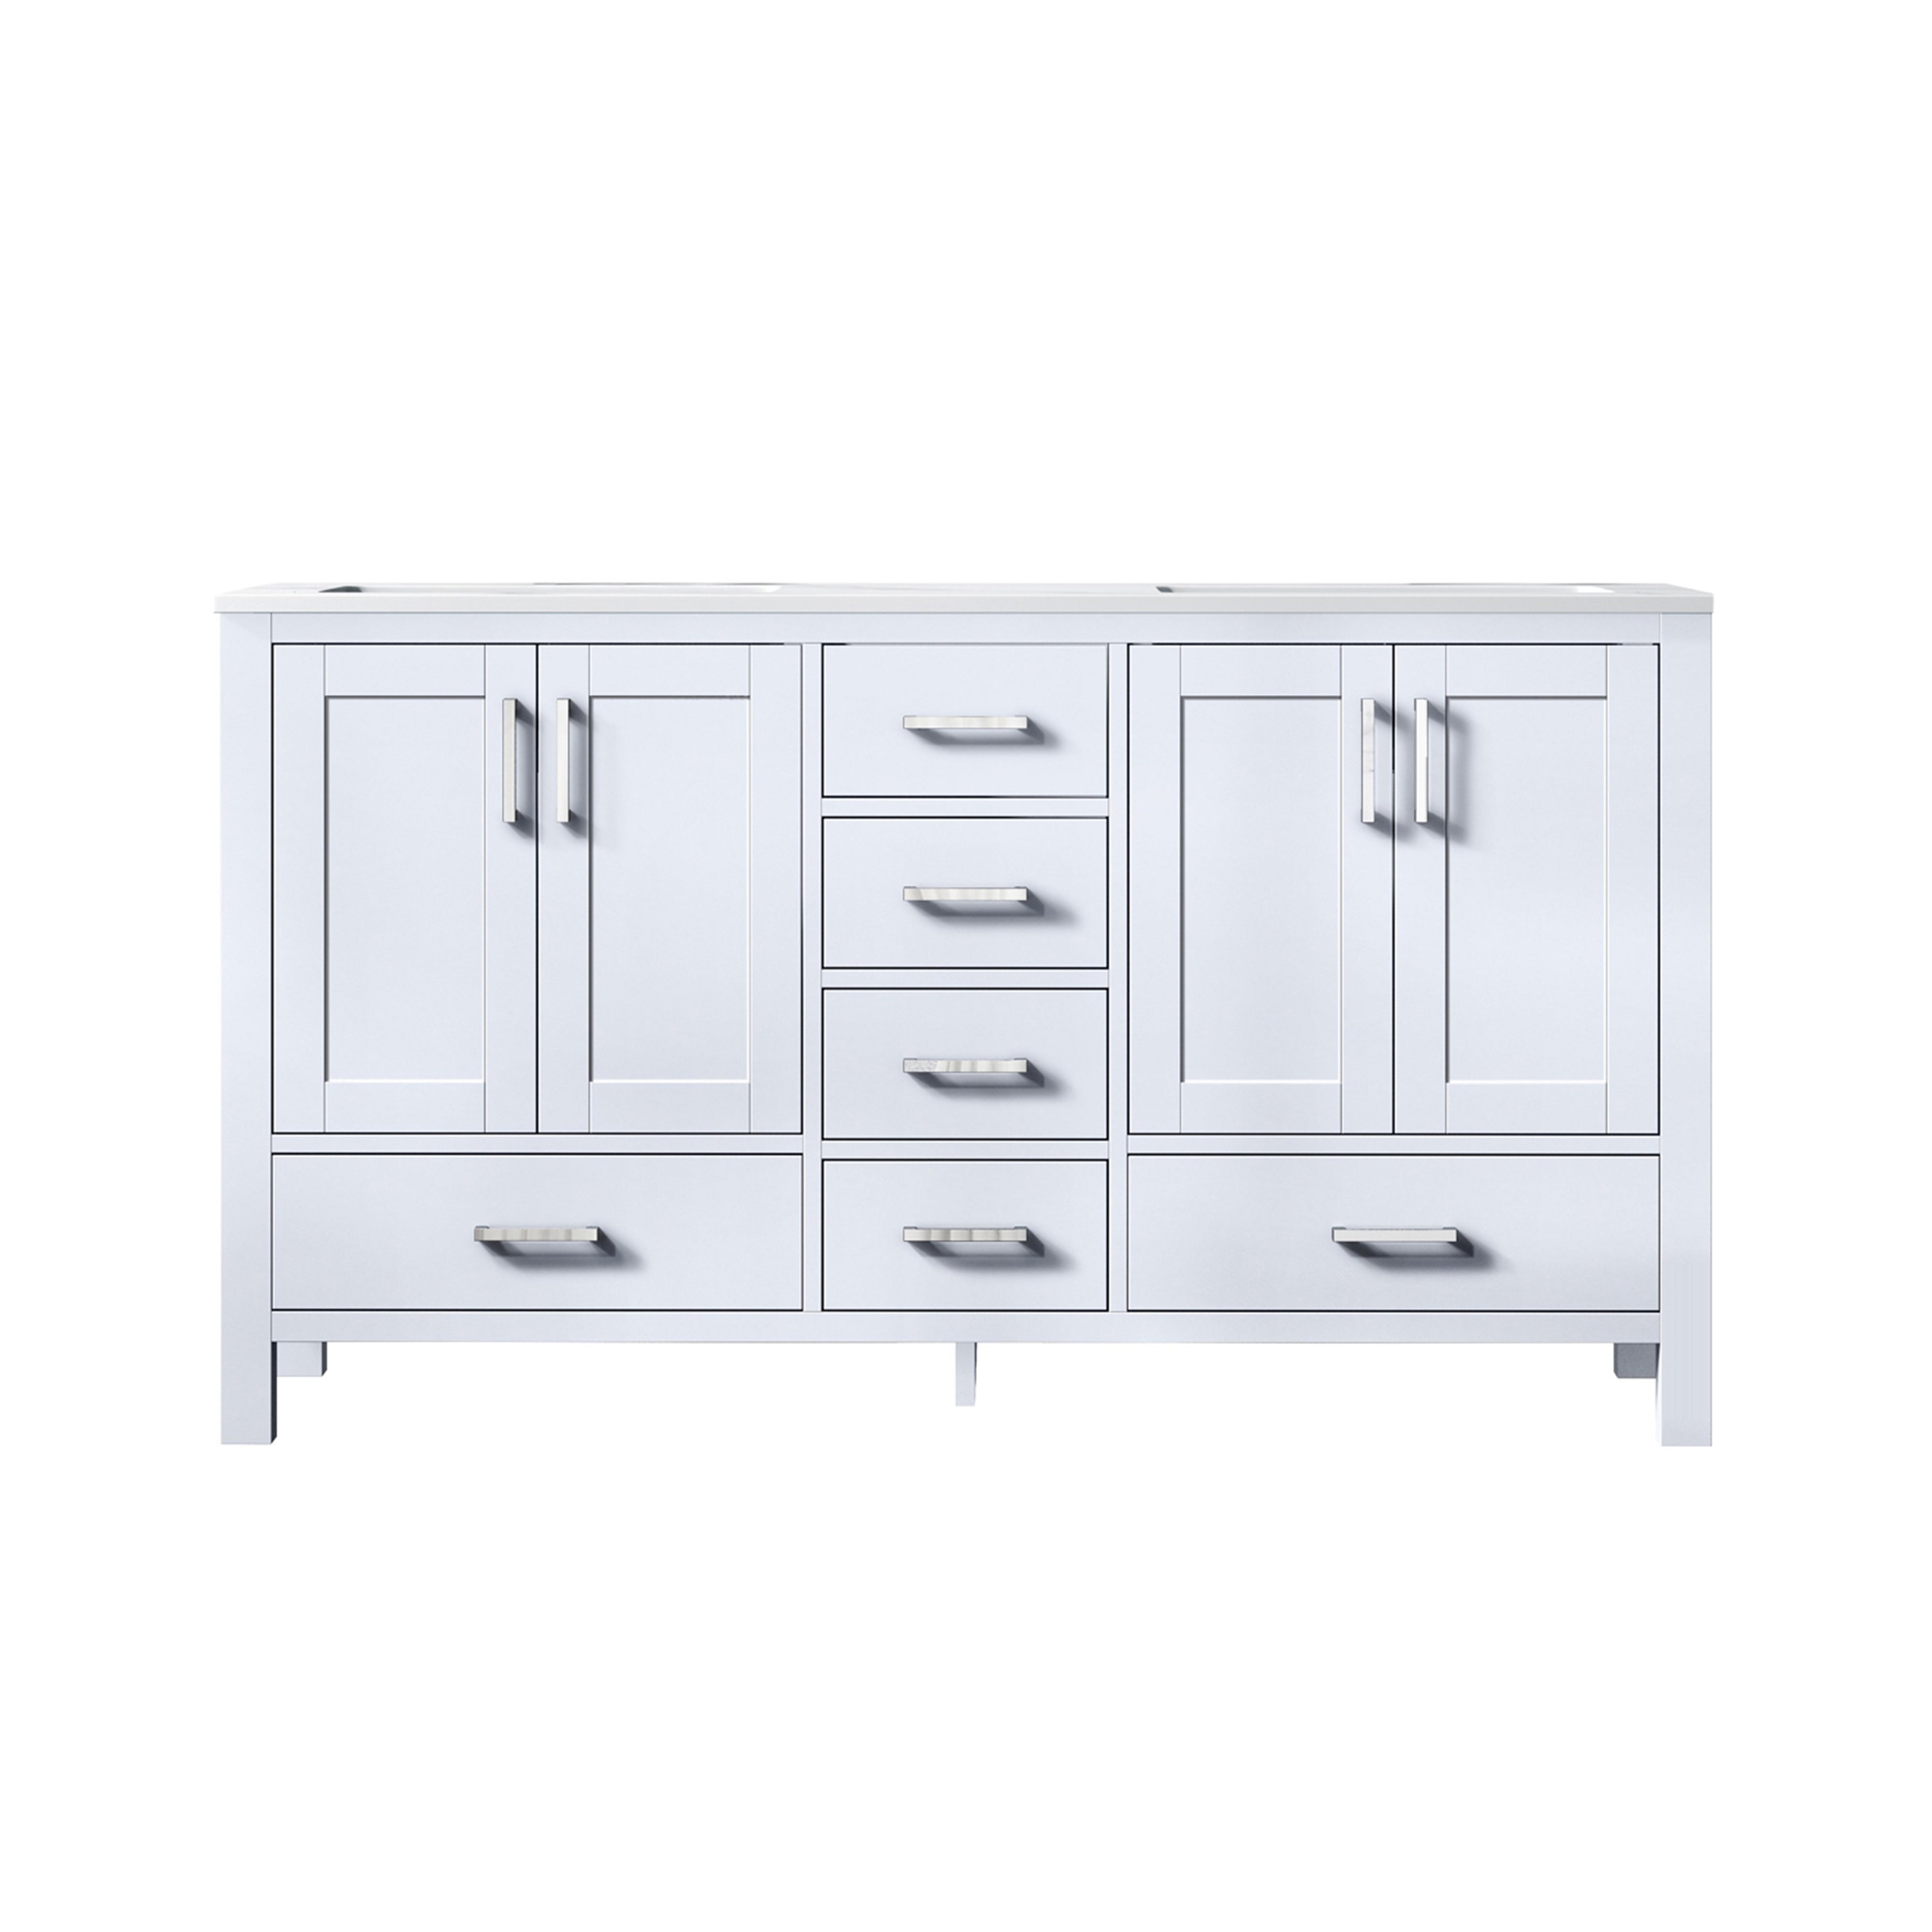 Lexora Jacques LJ342260DADS000 60" Double Bathroom Vanity in White with White Carrara Marble, White Rectangle Sinks, Front View